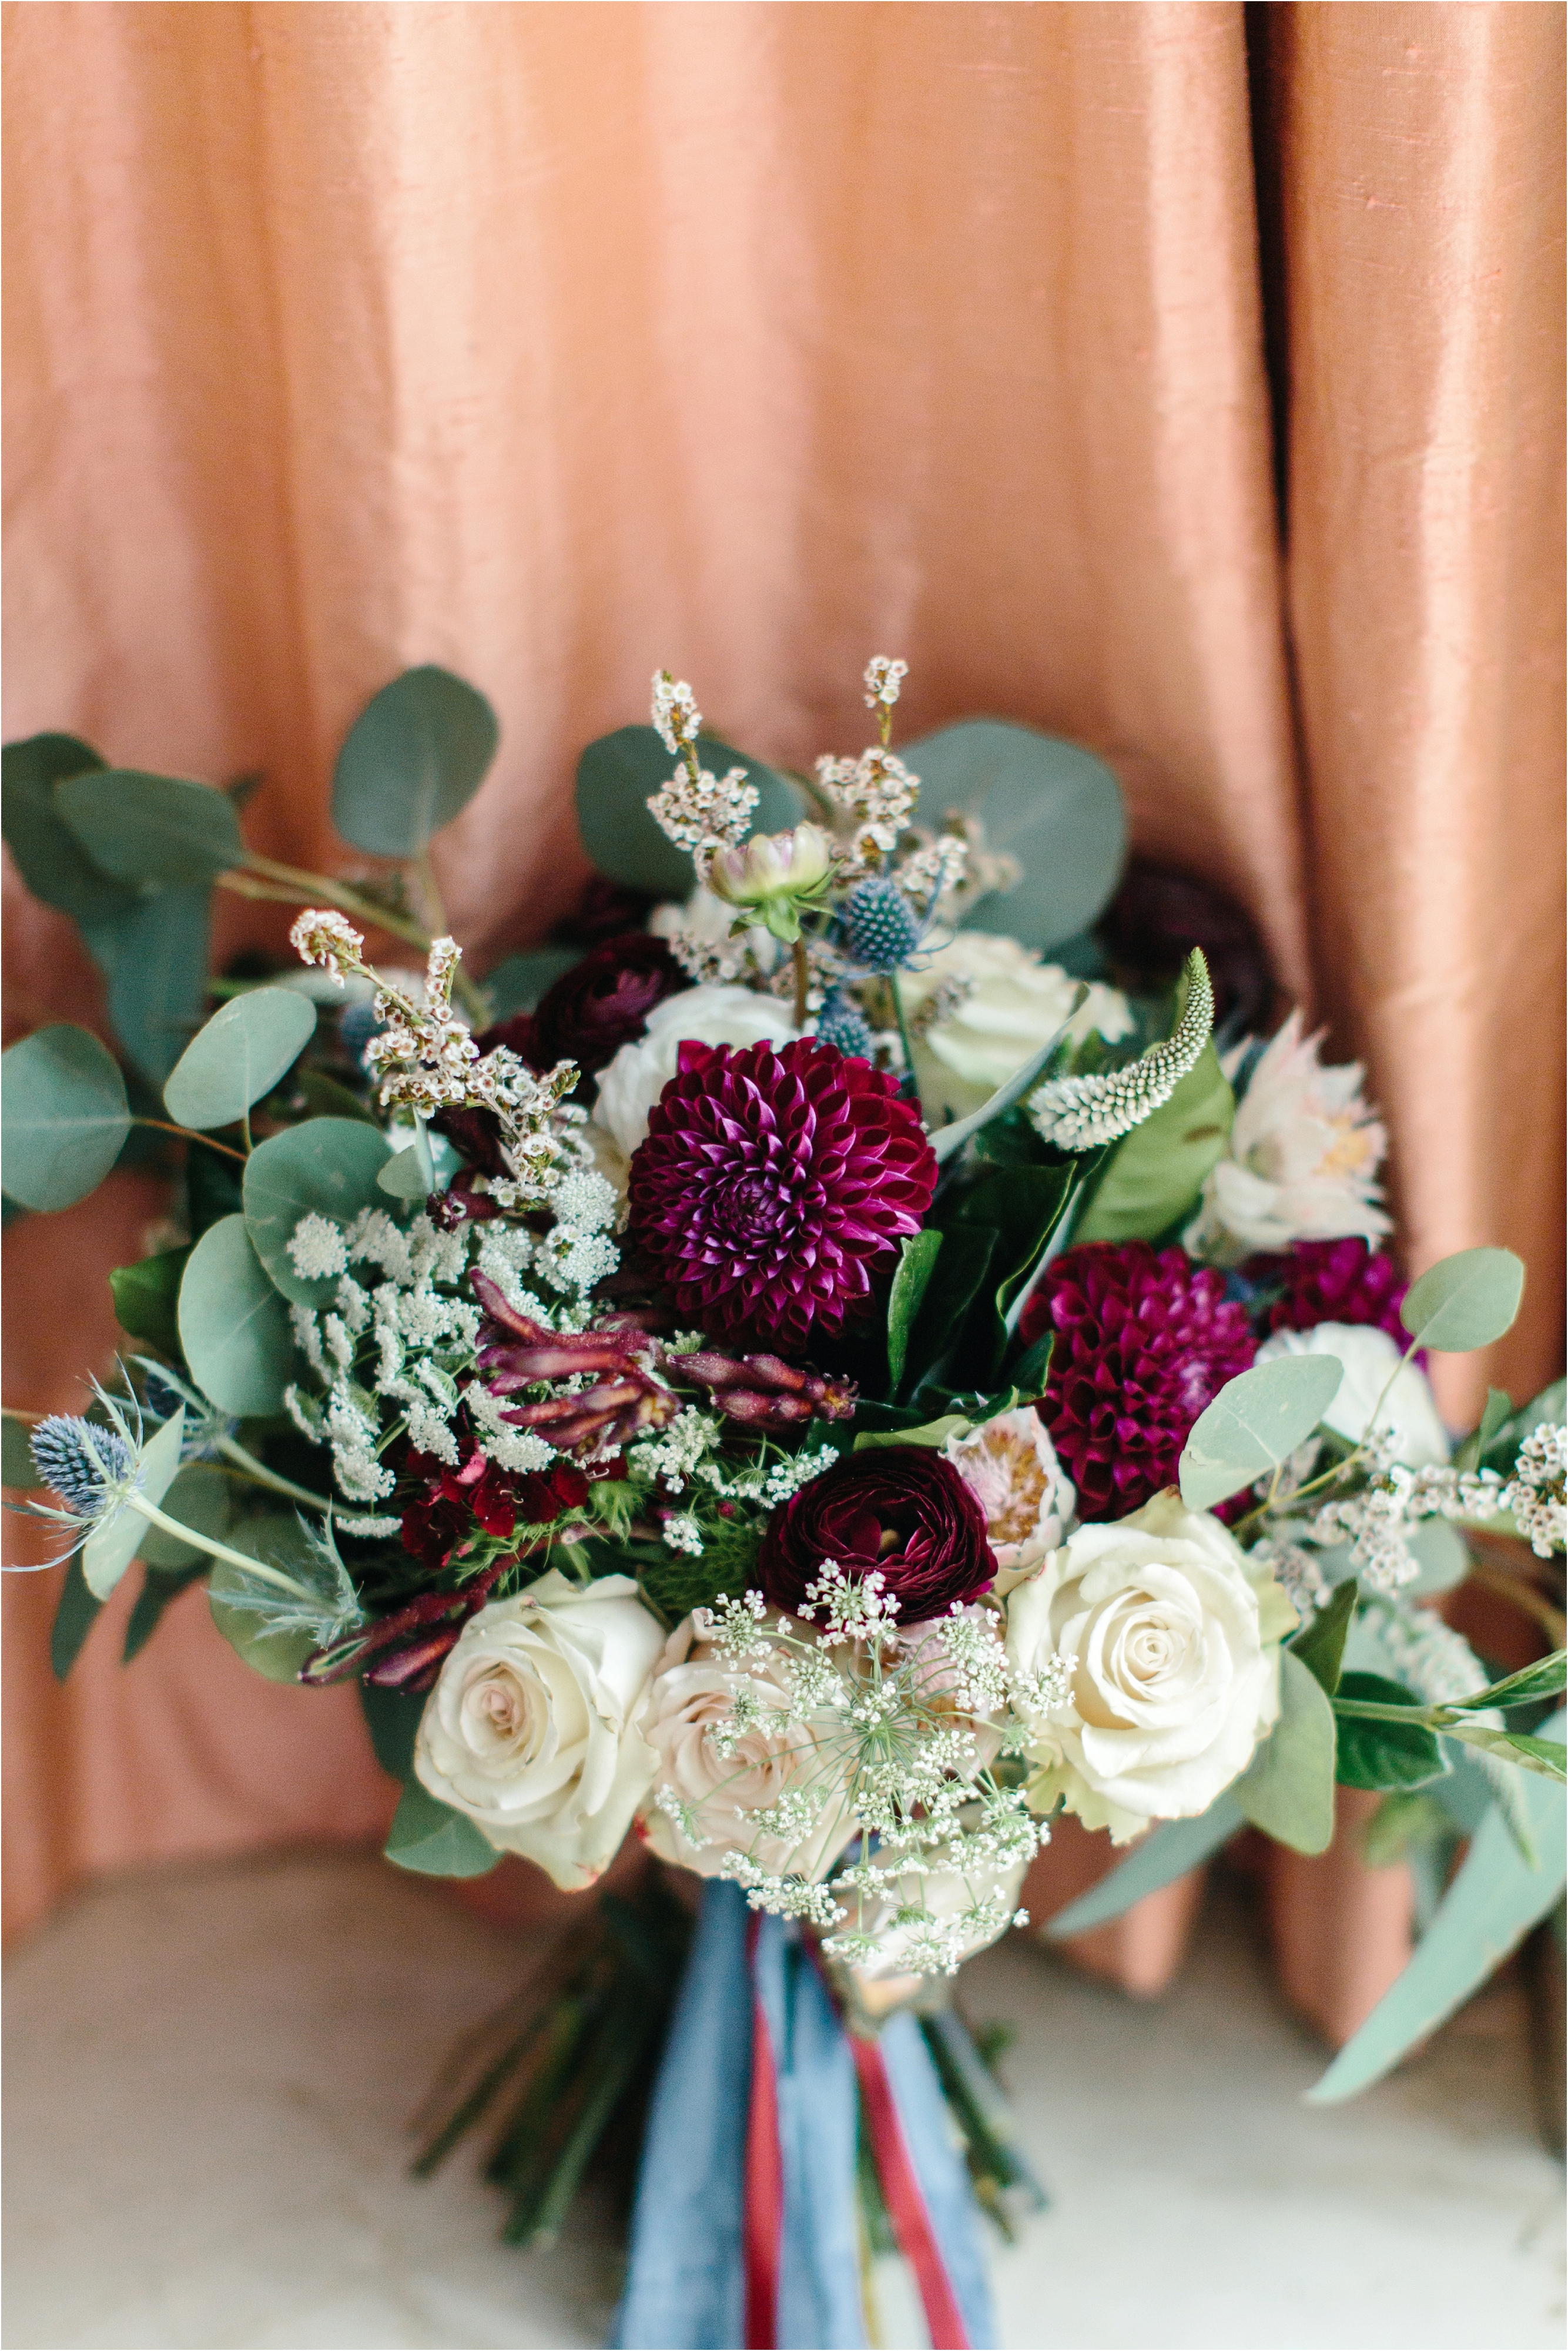 Whimsical Maroon and white bouquet by Sheri Strebelow